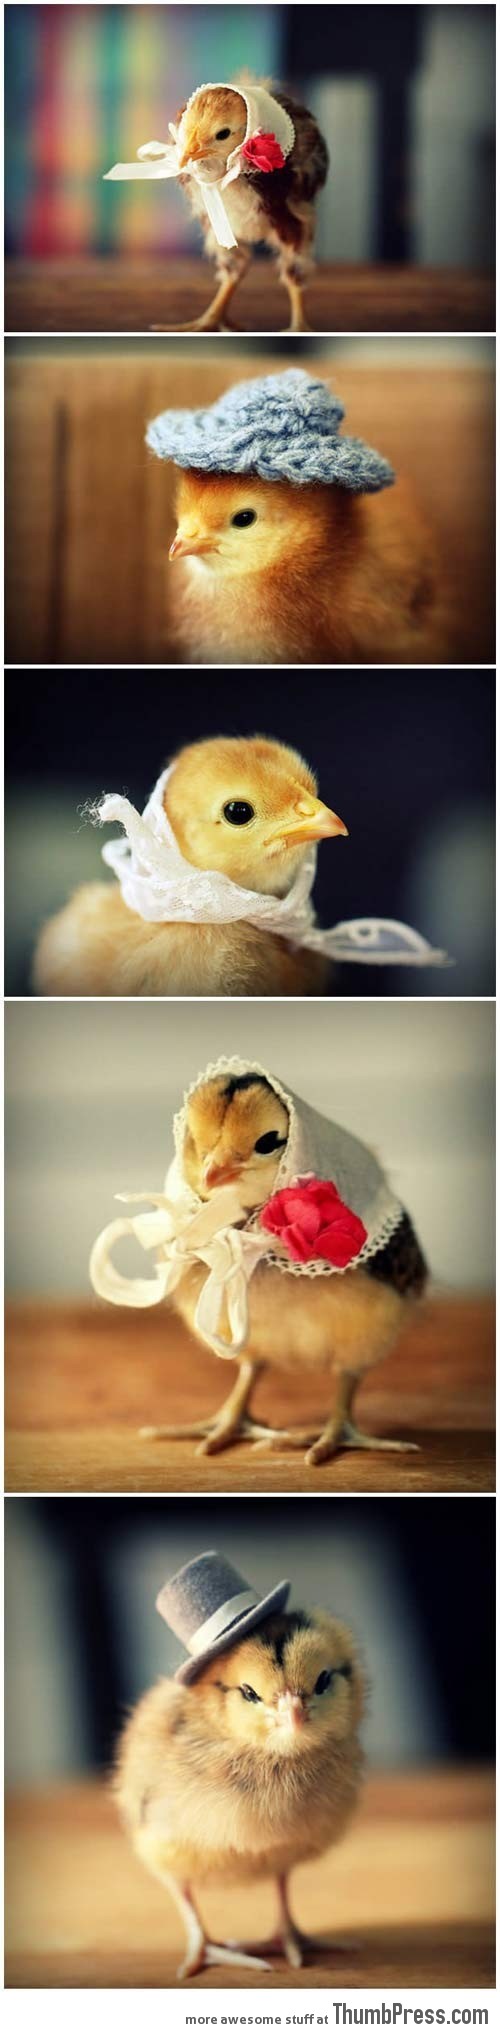 Chicks in hats…